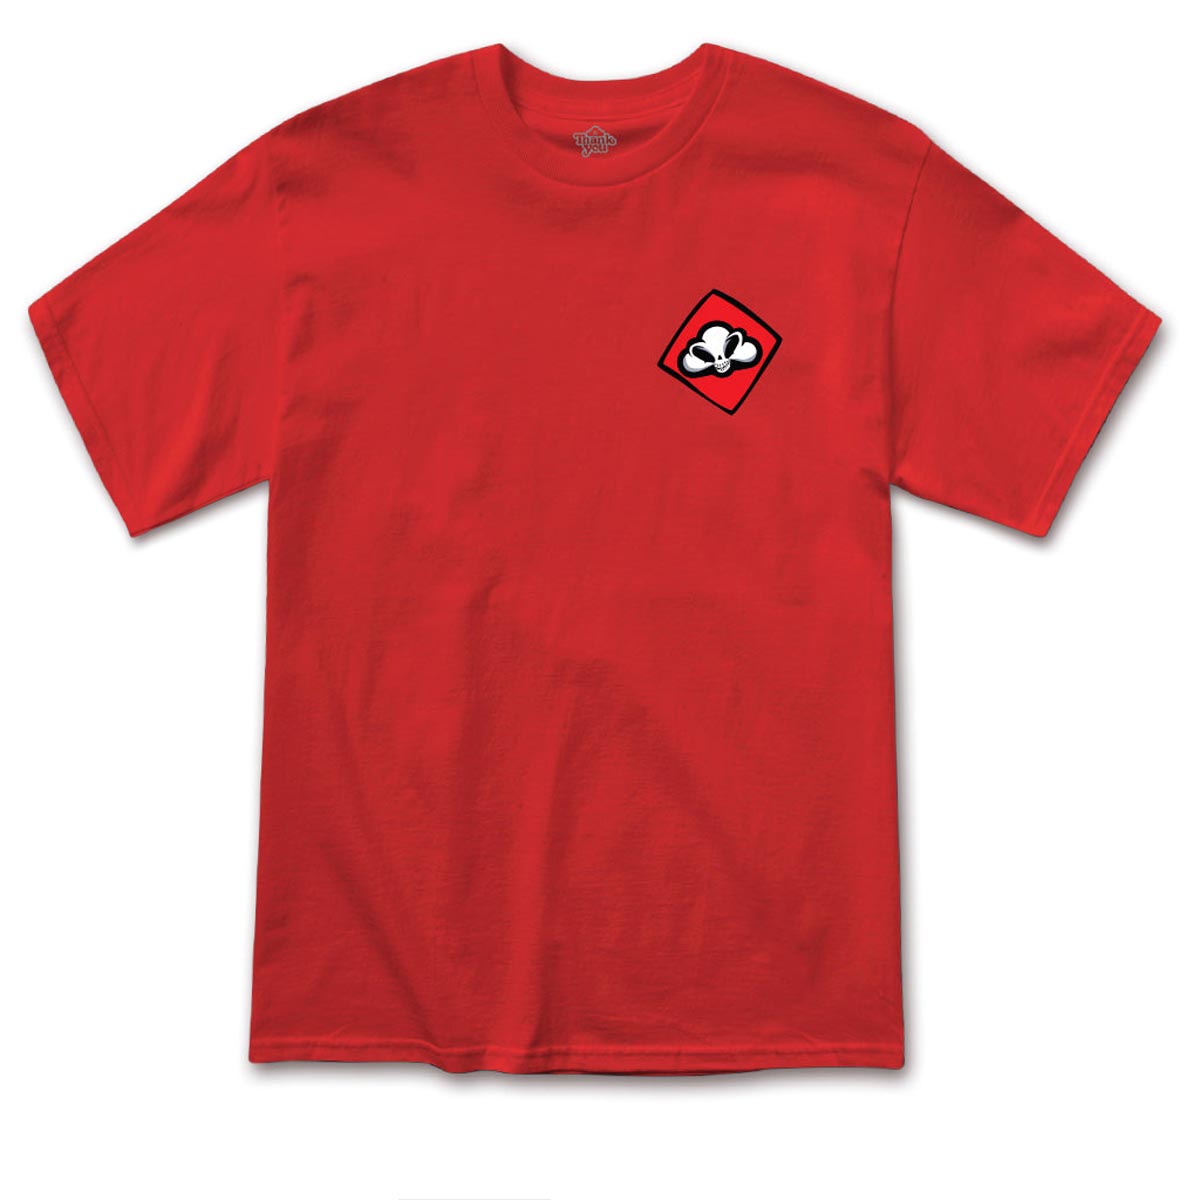 Thank You x Ronnie Creager Turntable T-Shirt - Red image 2